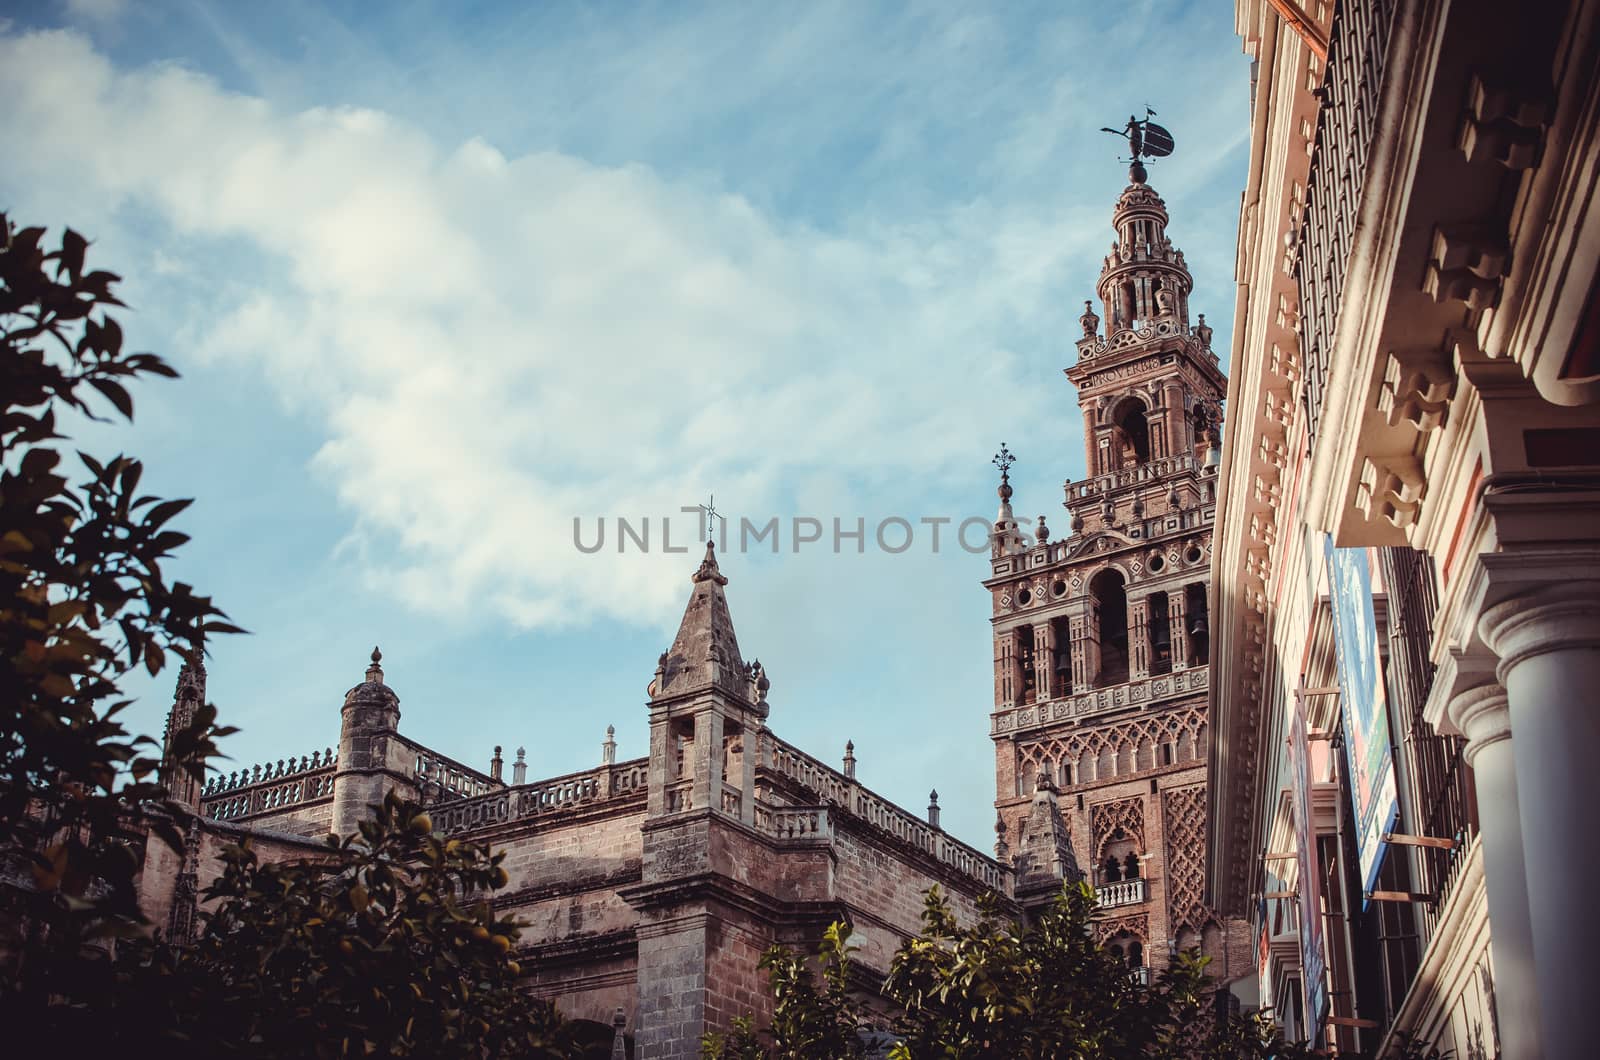 Patio de Banderas square, or Orange Trees square, one of the places where the Giralda tower can be seen in Sevilla, Spain